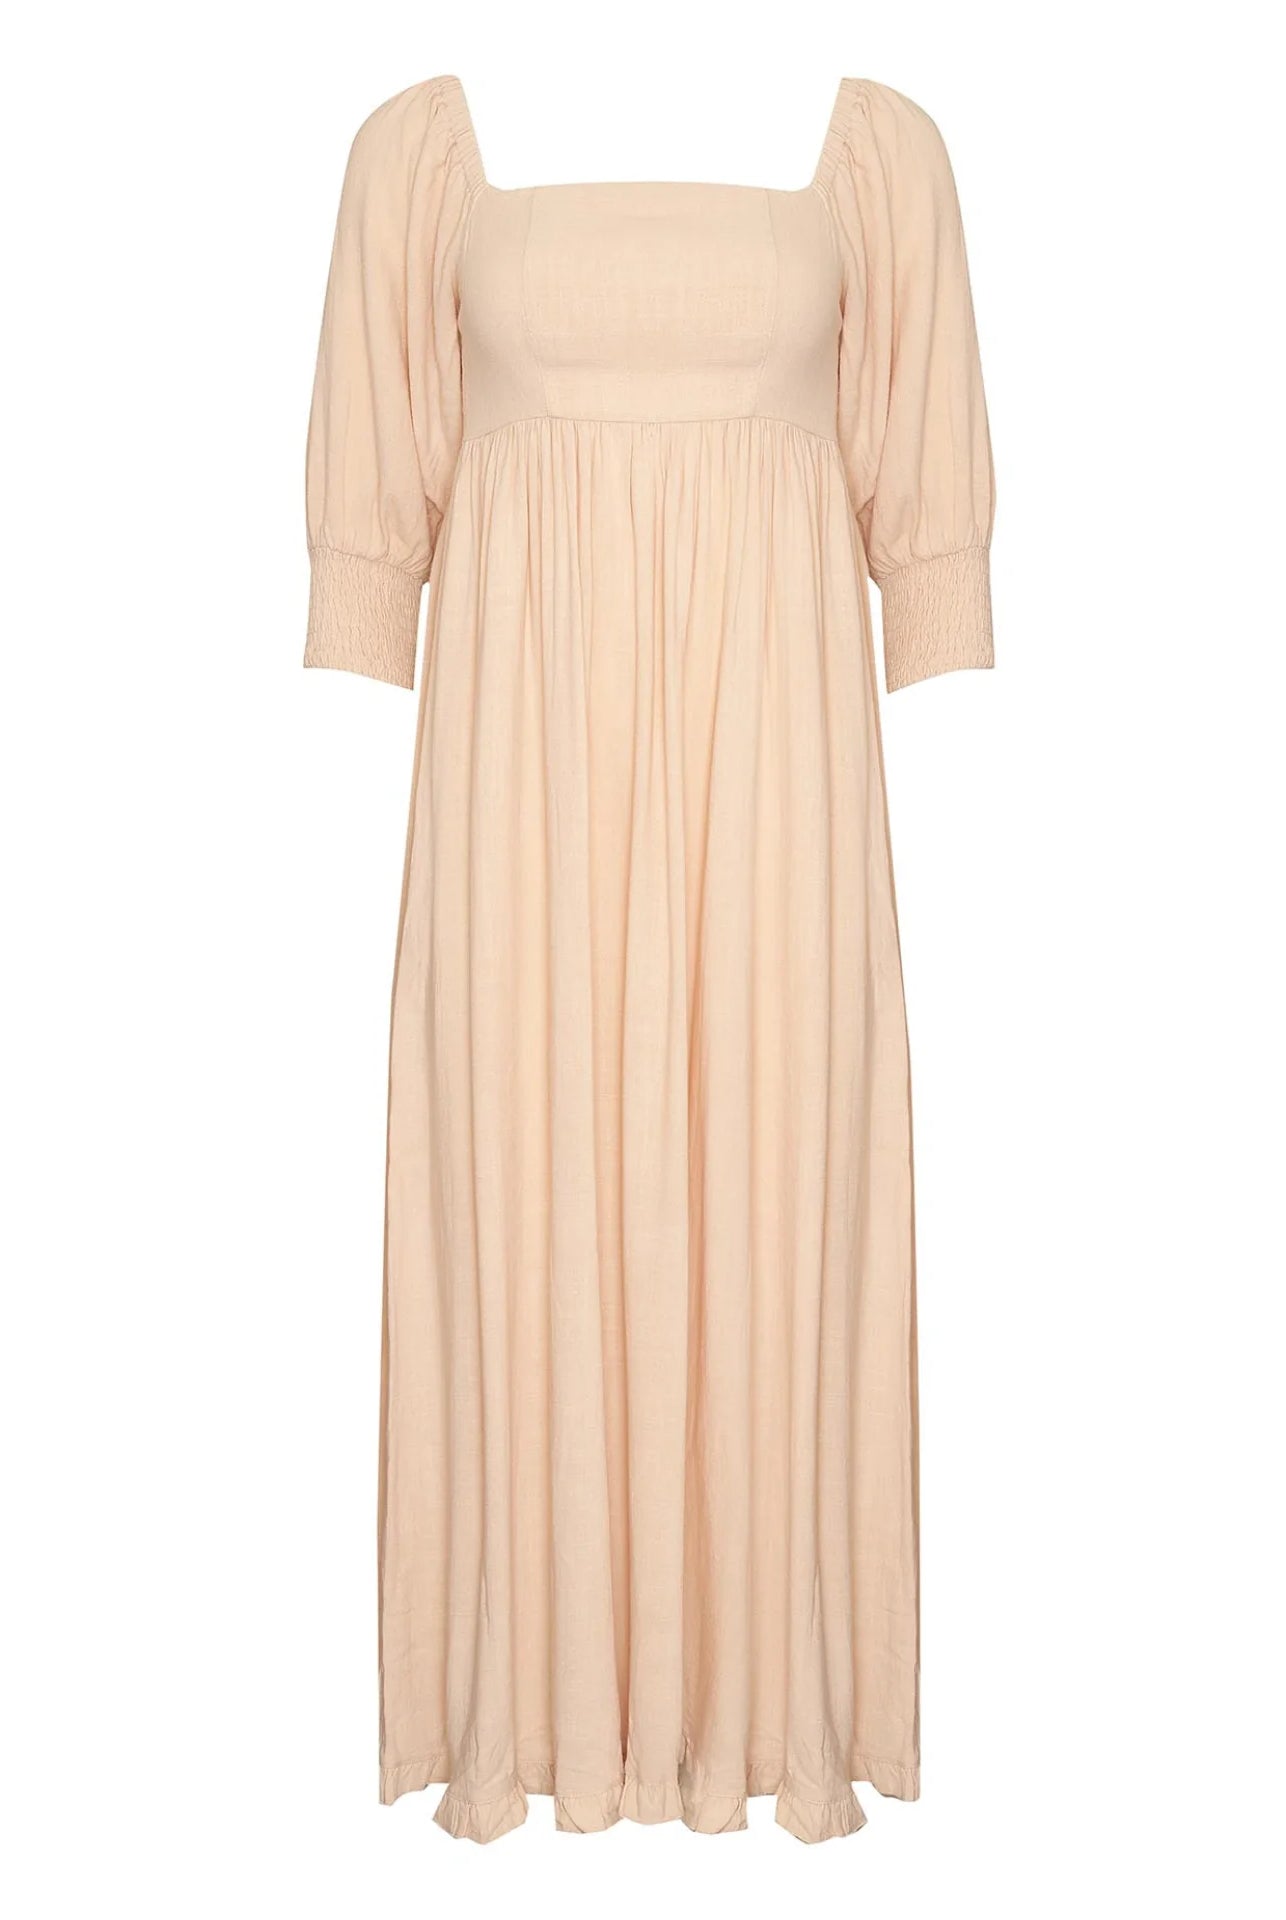 Sand Maxi Dress from Girl and the sun in breathable fabric